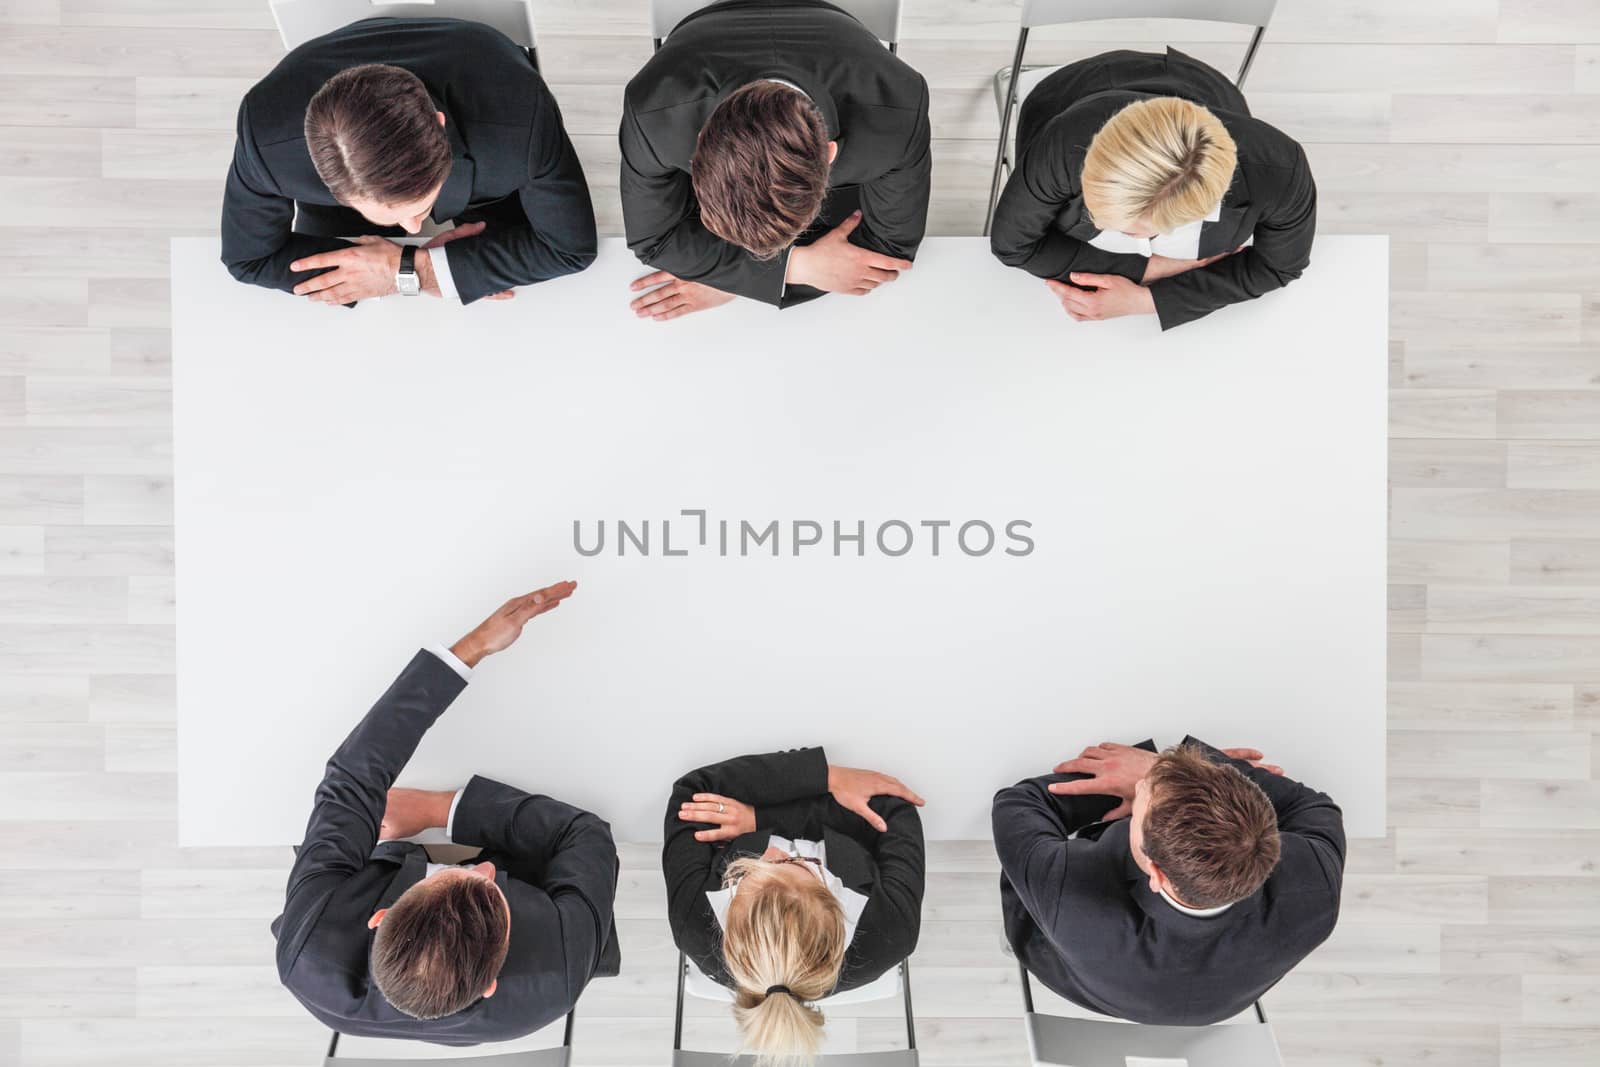 Business people sitting around empty table, business man pointing to blank copy space in the middle